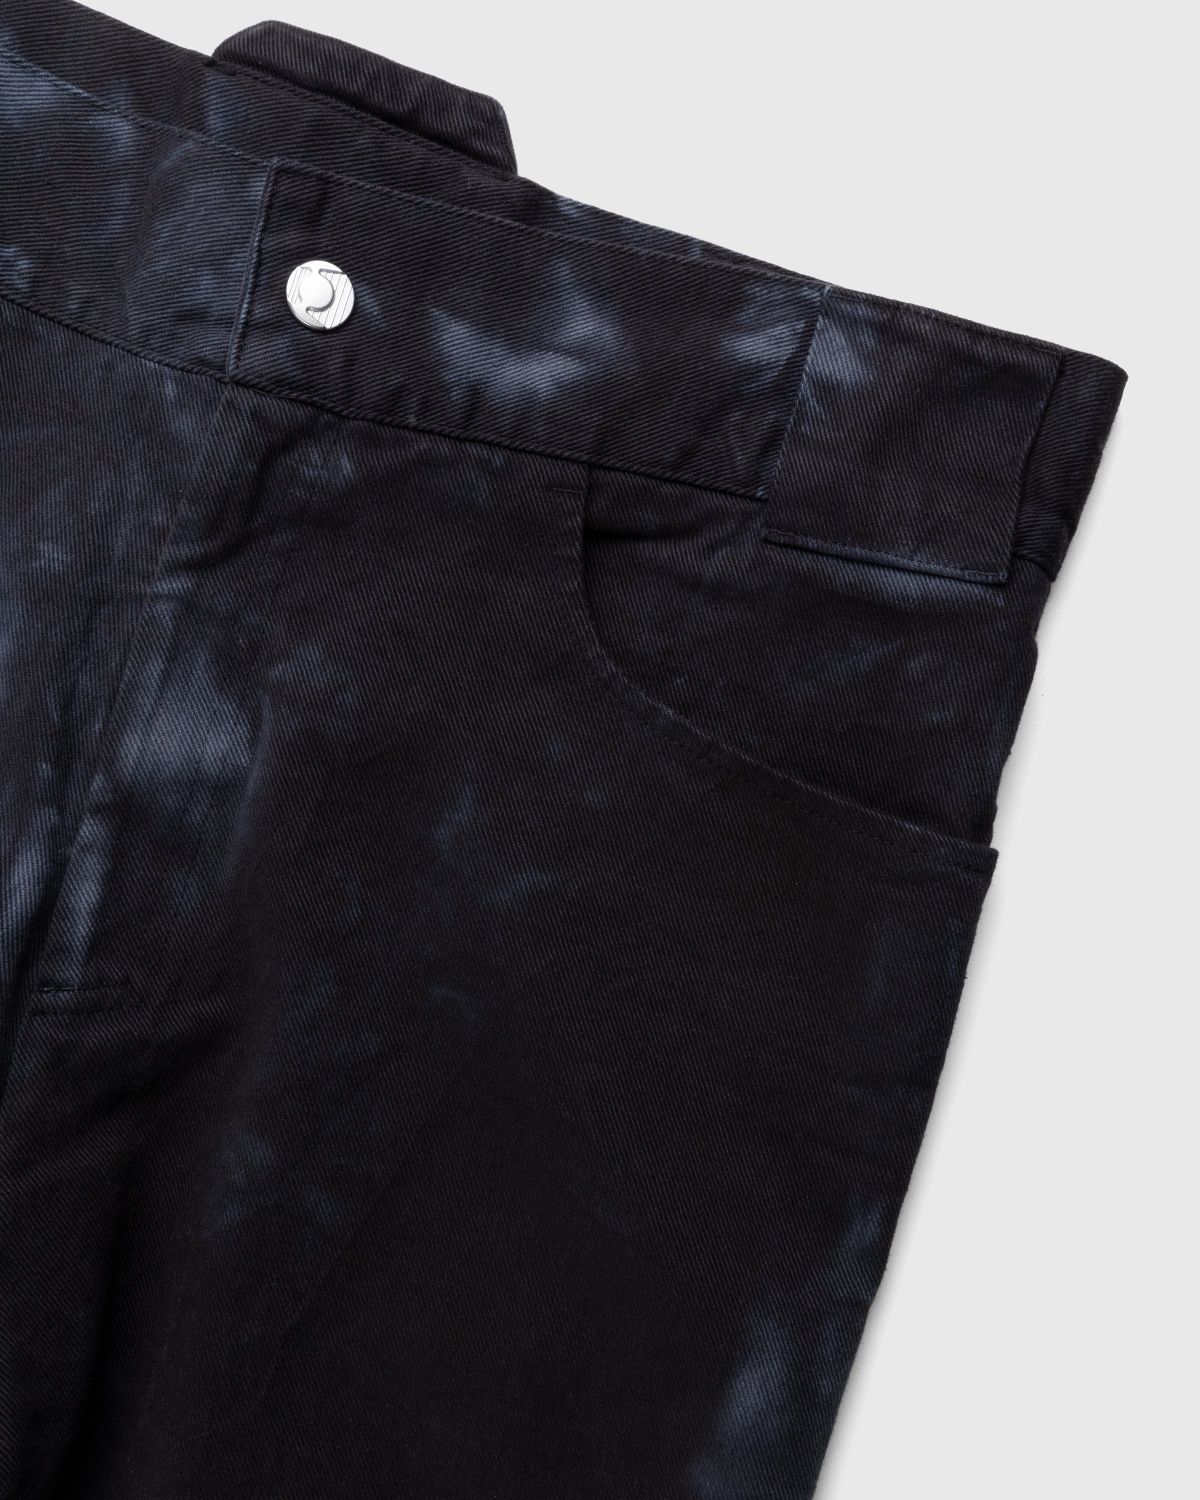 AFFXWRKS – Crease-Dyed Corso Pant Black - Trousers - Black - Image 3